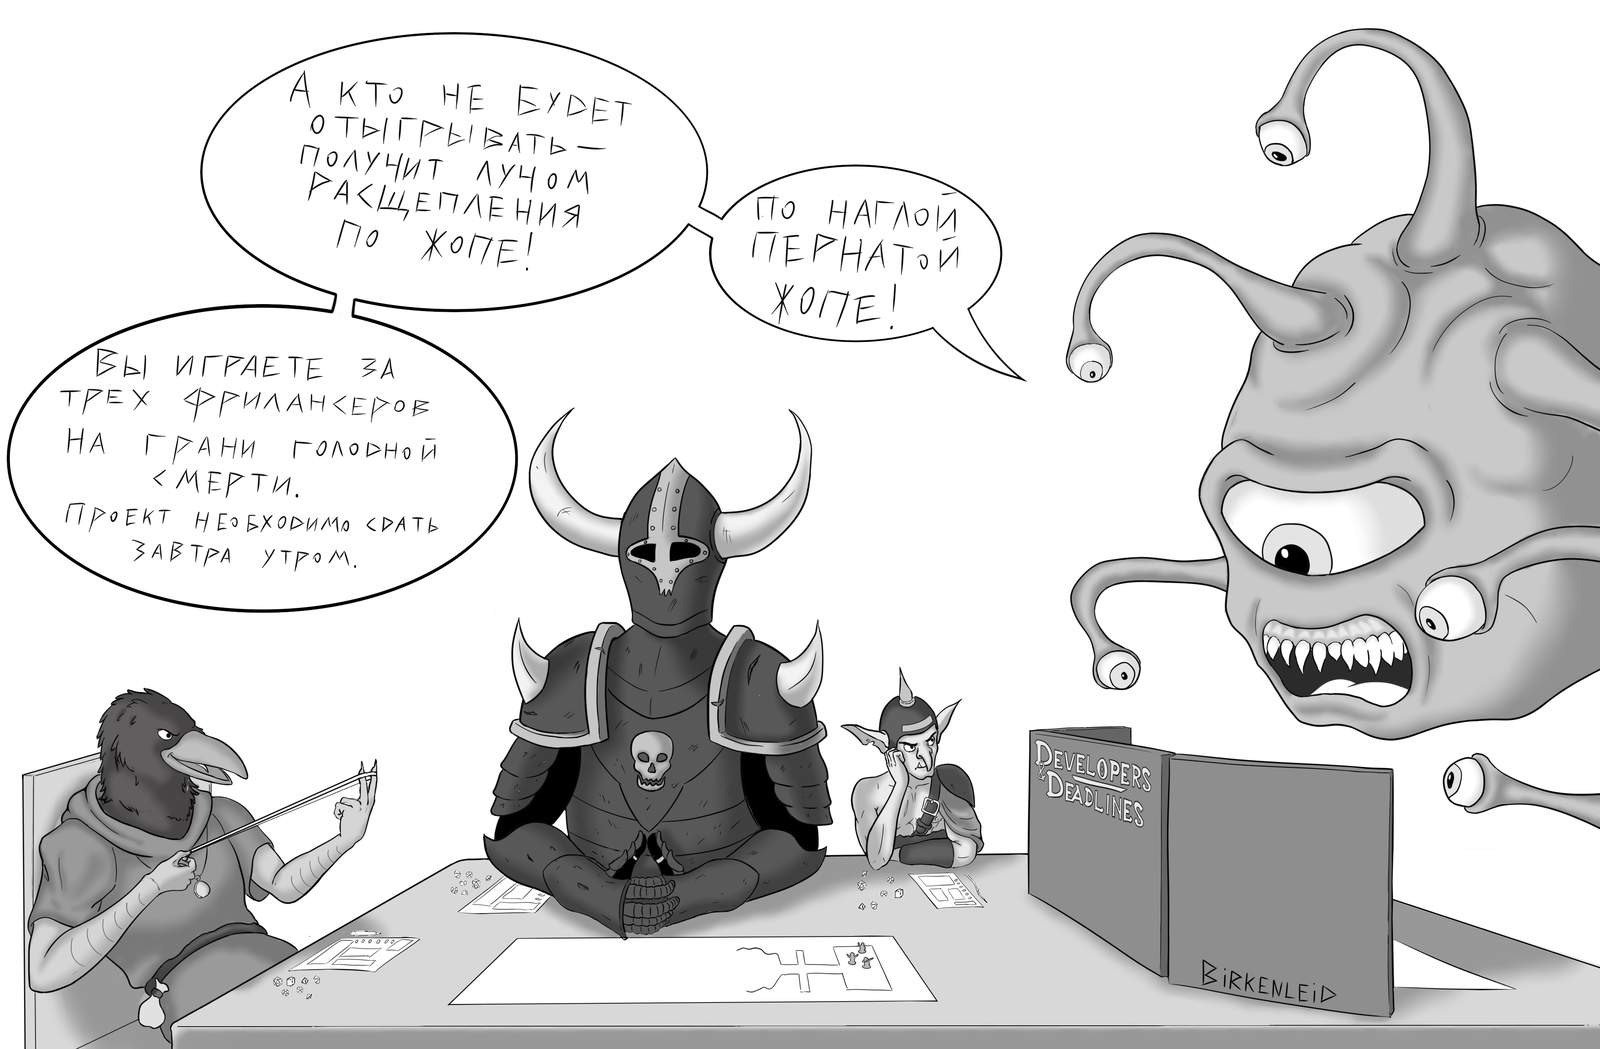 Developers & Deadlines - My, Digital drawing, Dungeons & dragons, Tabletop role-playing games, Monster, Comics